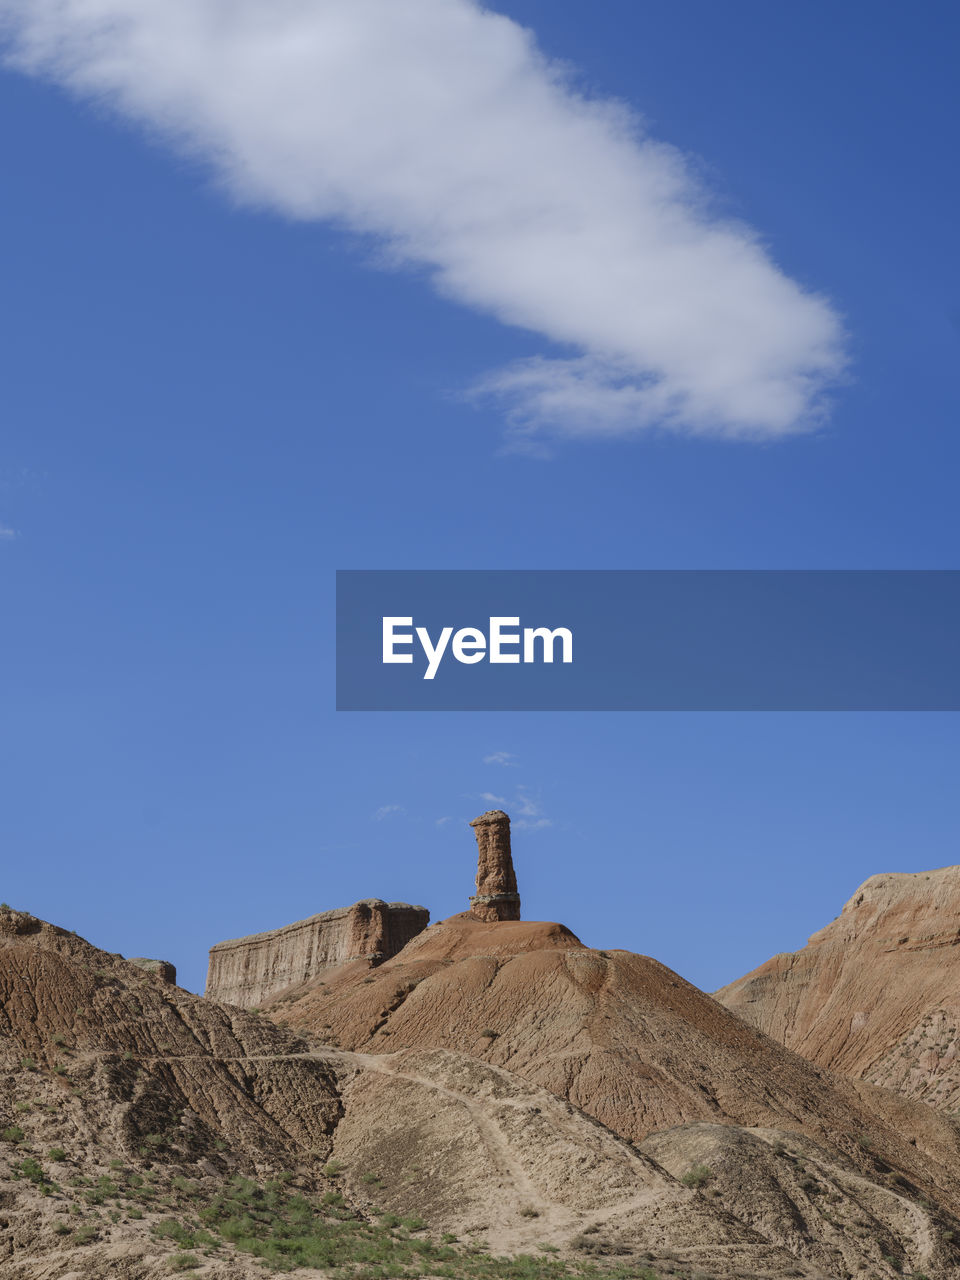 sky, mountain, architecture, built structure, cloud, nature, landscape, environment, blue, building exterior, plateau, rock, scenics - nature, land, no people, day, non-urban scene, history, geology, travel destinations, building, outdoors, the past, travel, tower, natural environment, monument, beauty in nature, low angle view, desert, industry, tranquility